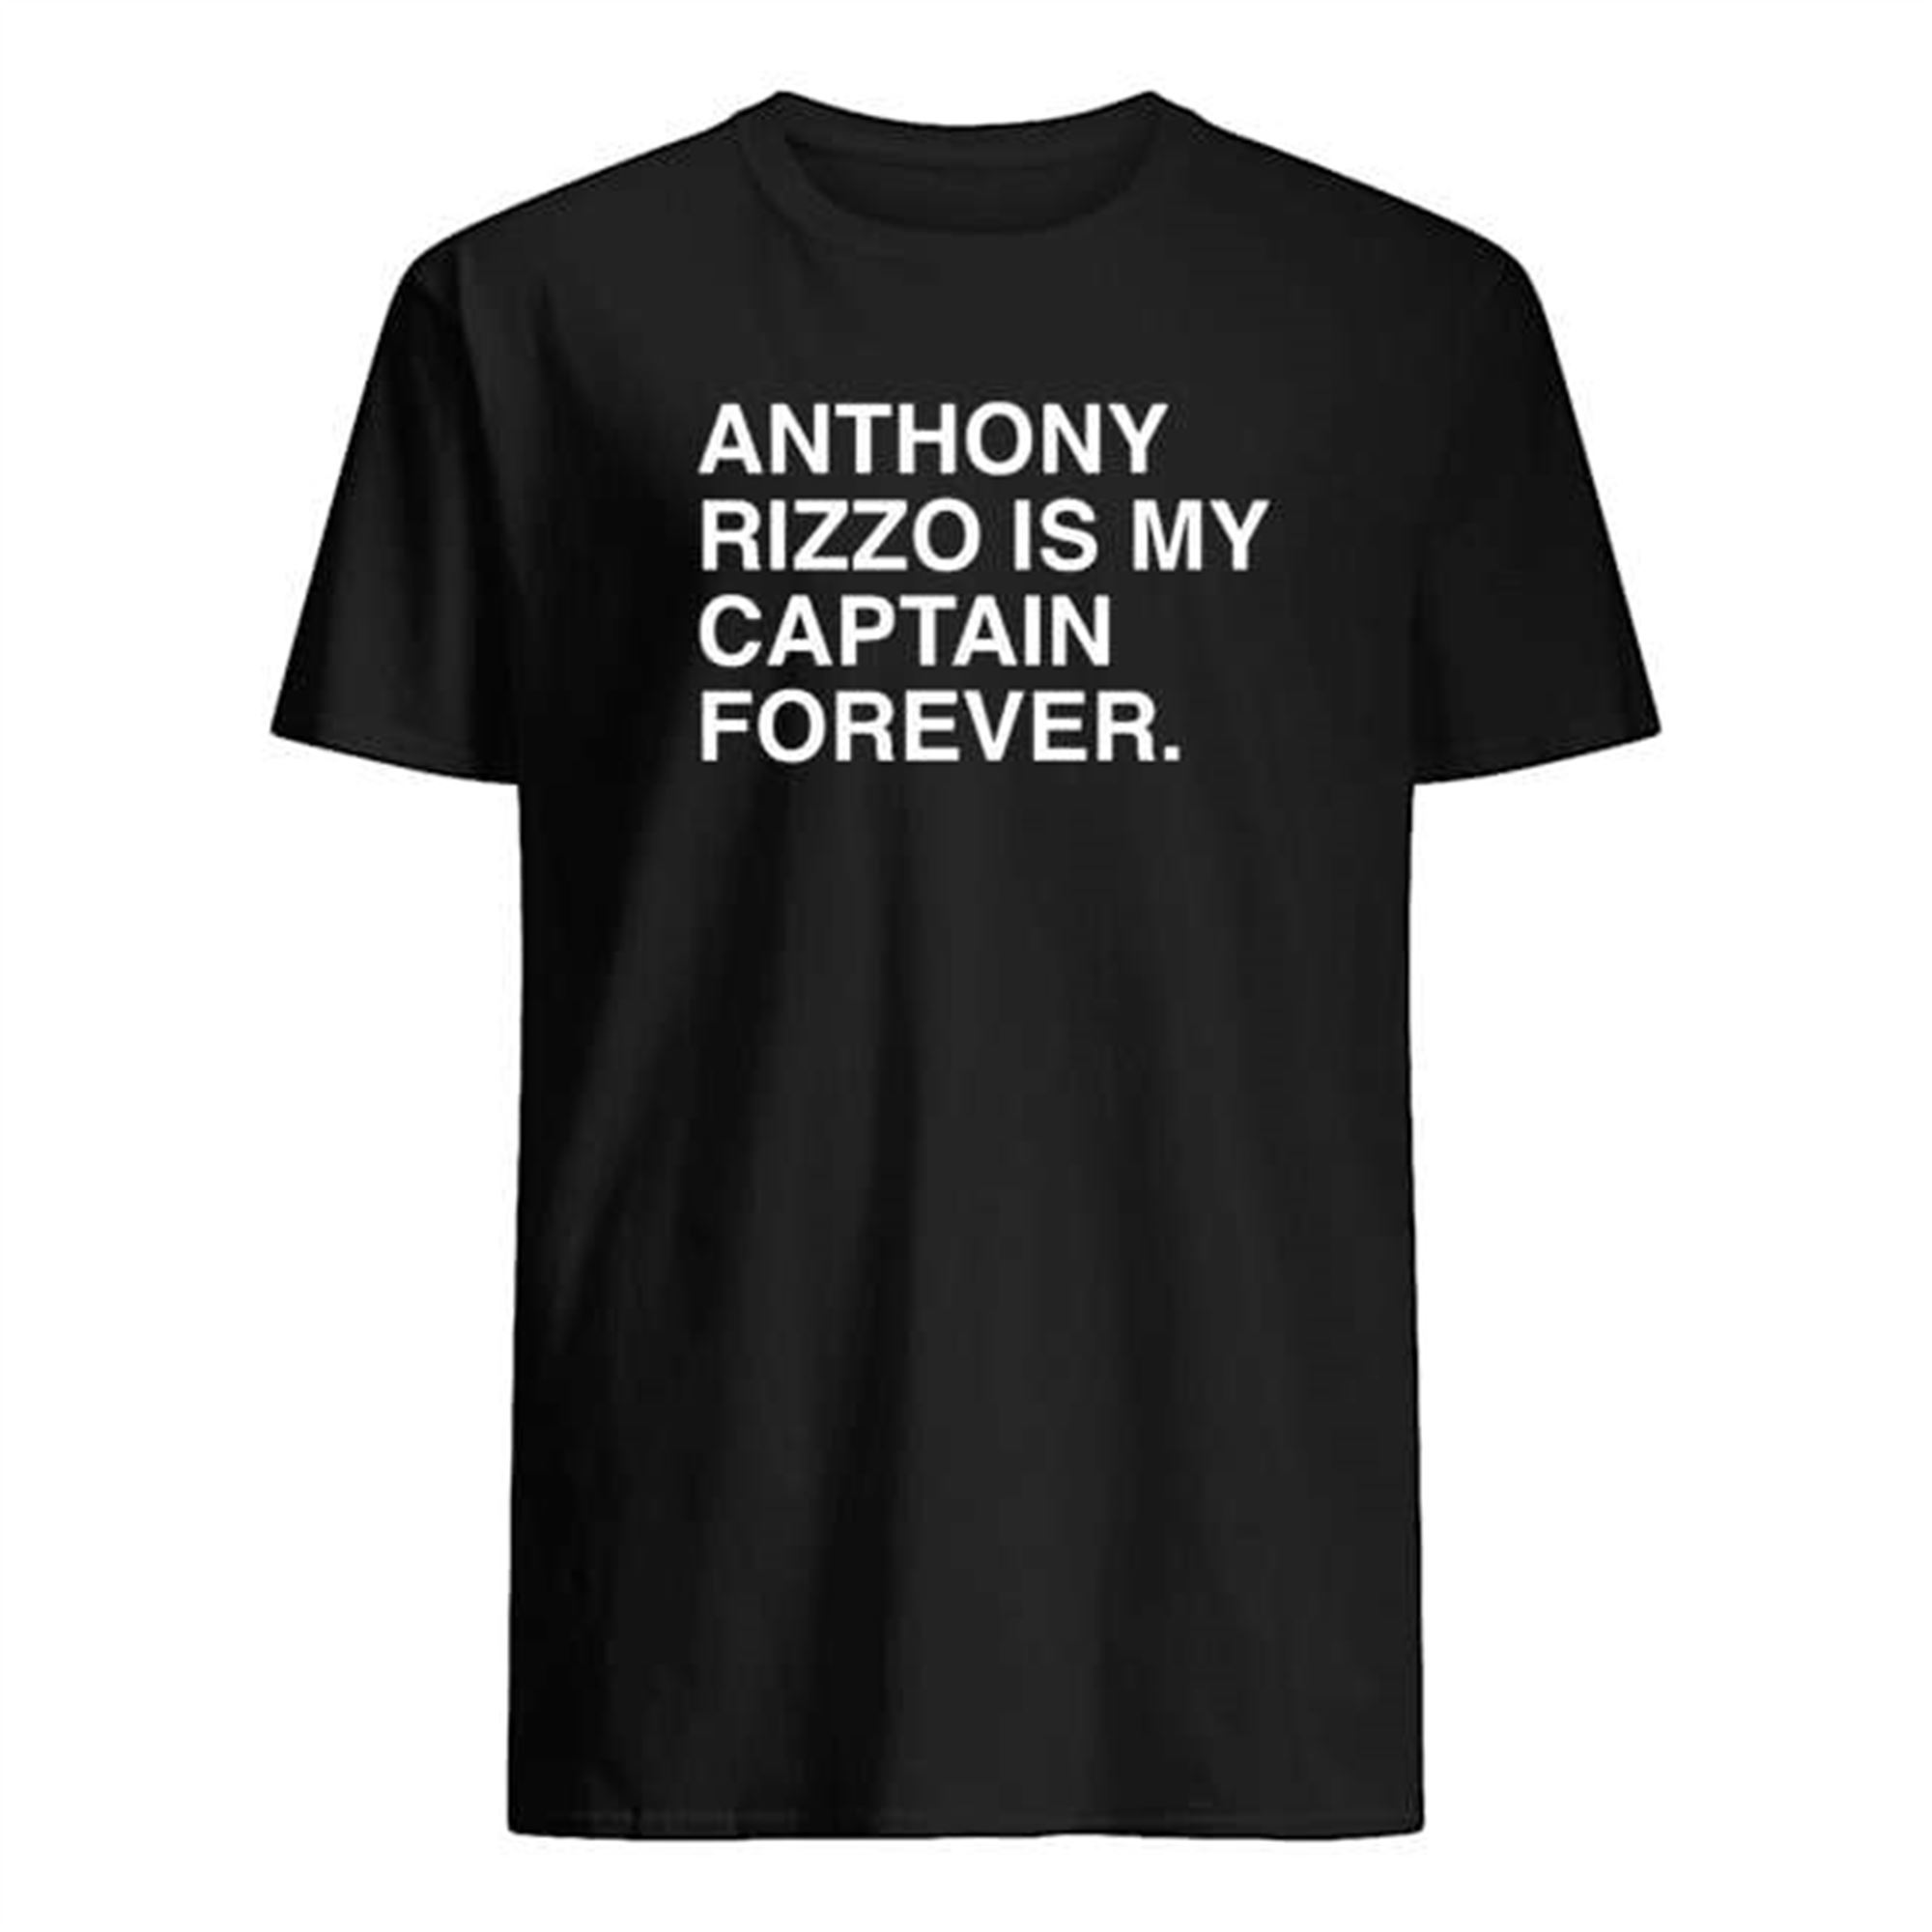 Anthony Rizzo My Captain Forever T-shirt Full Size Up To 5xl